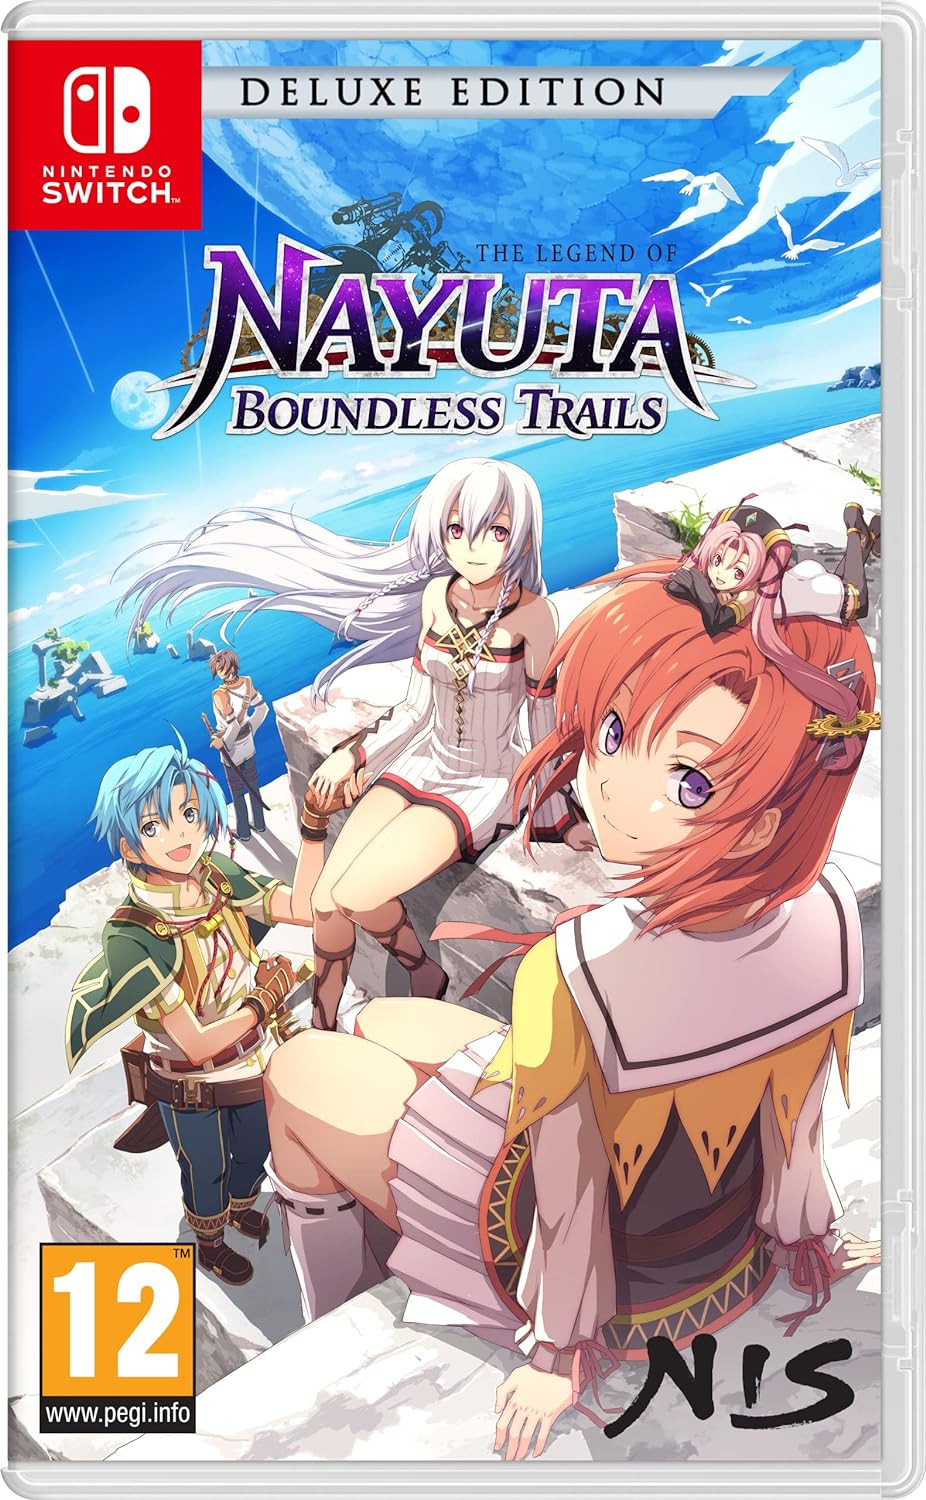 The Legend of Nayuta Boundless Trails Deluxe Edition - Nintendo Switch